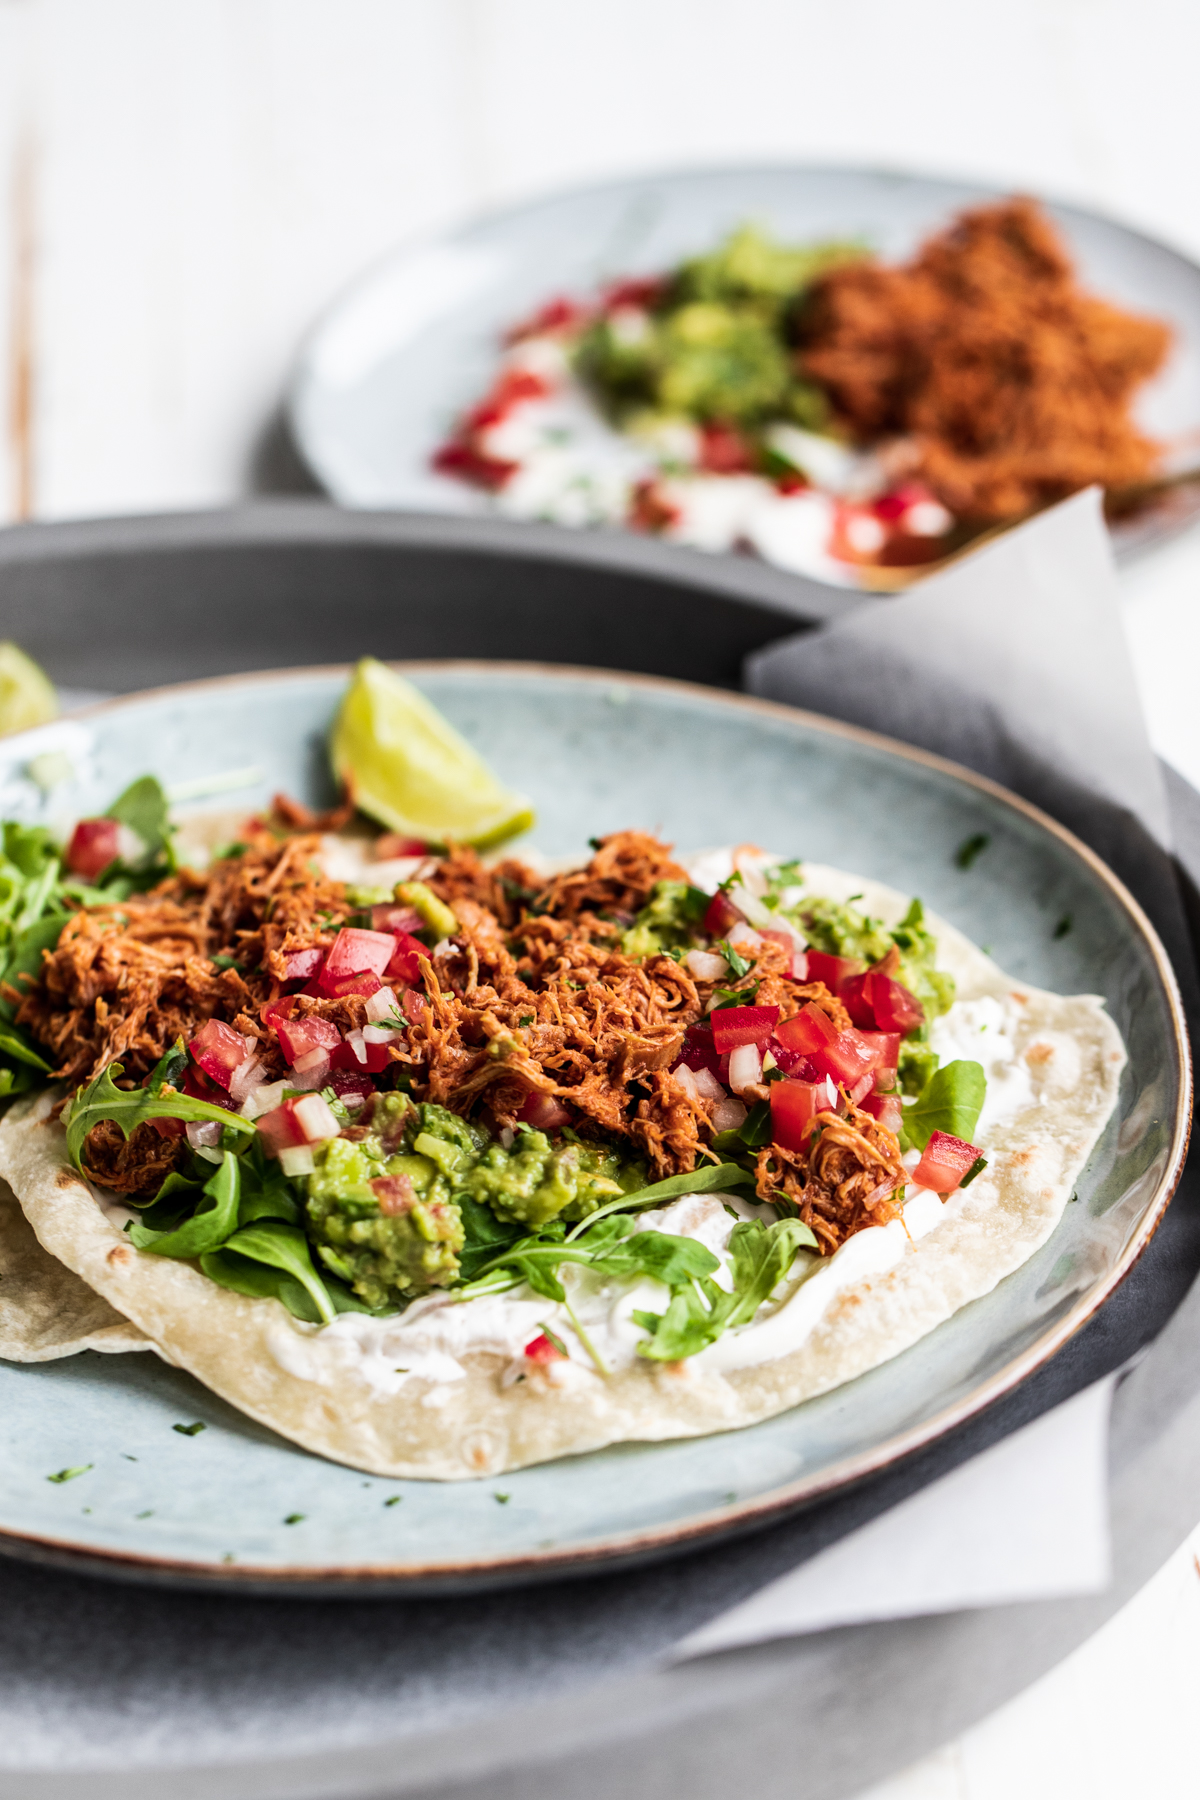 Slow cooked chipotle chicken tacos on a blue plate and white background